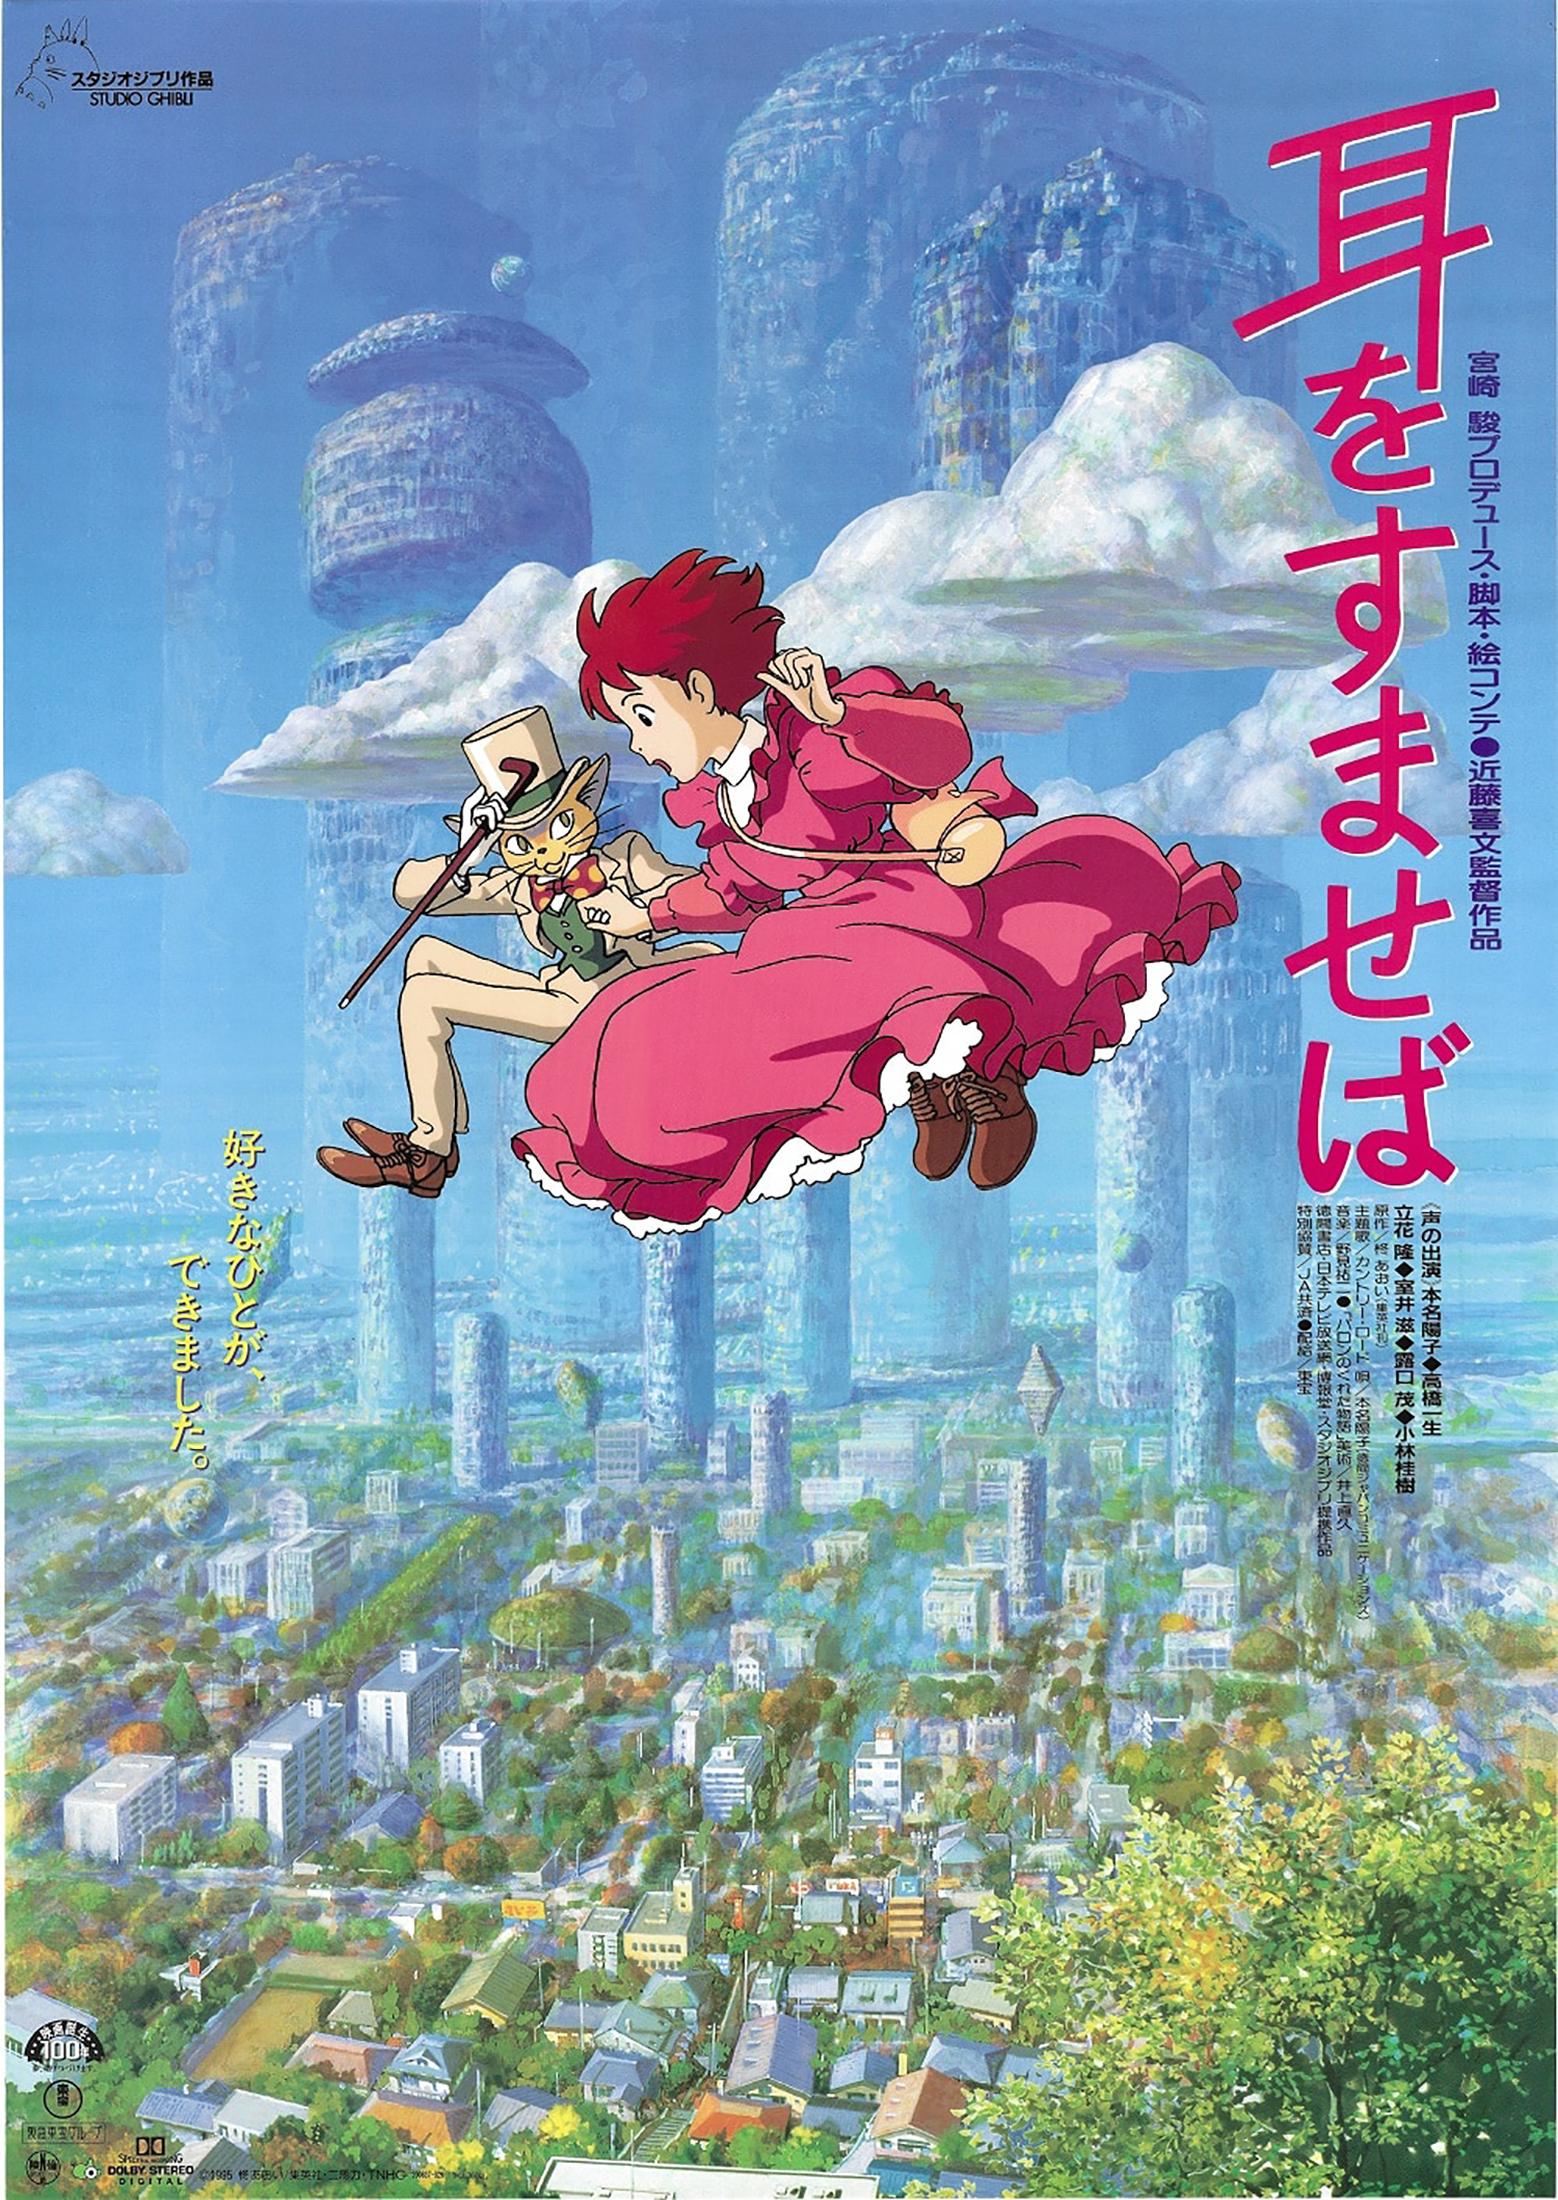 Whisper of the Heart Original Vintage Large Movie Poster, Studio Ghibli (1995) - Print by Unknown